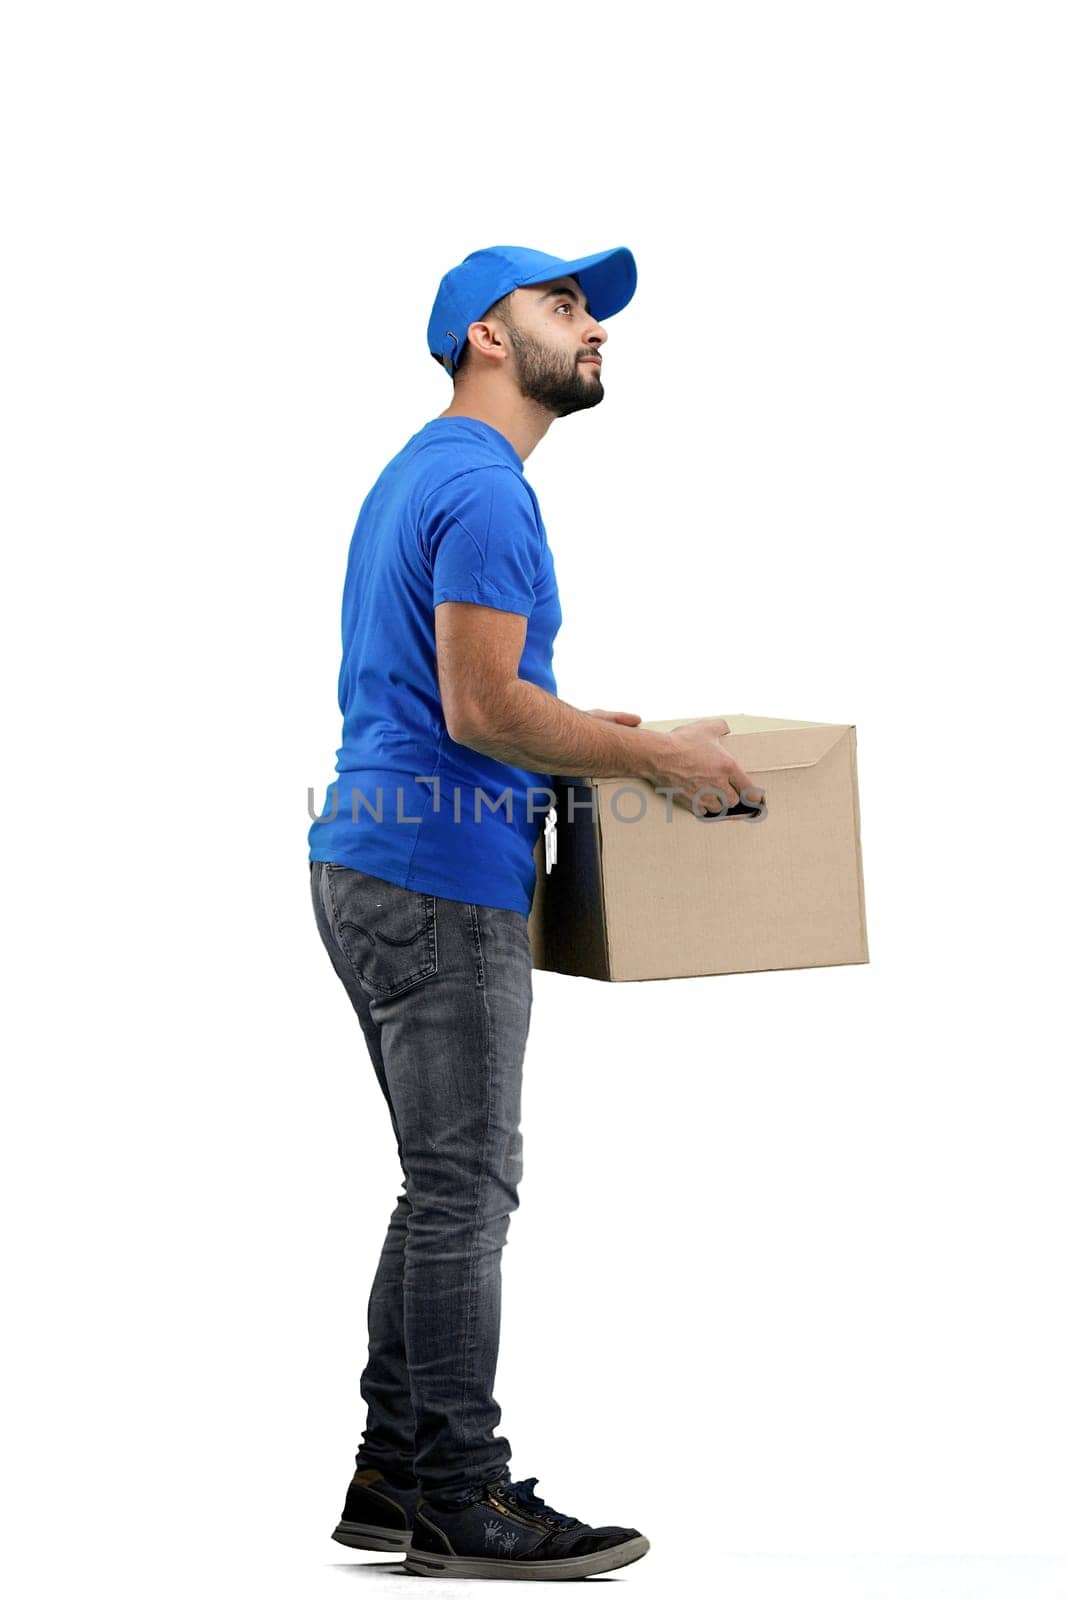 The deliveryman, in full height, on a white background.